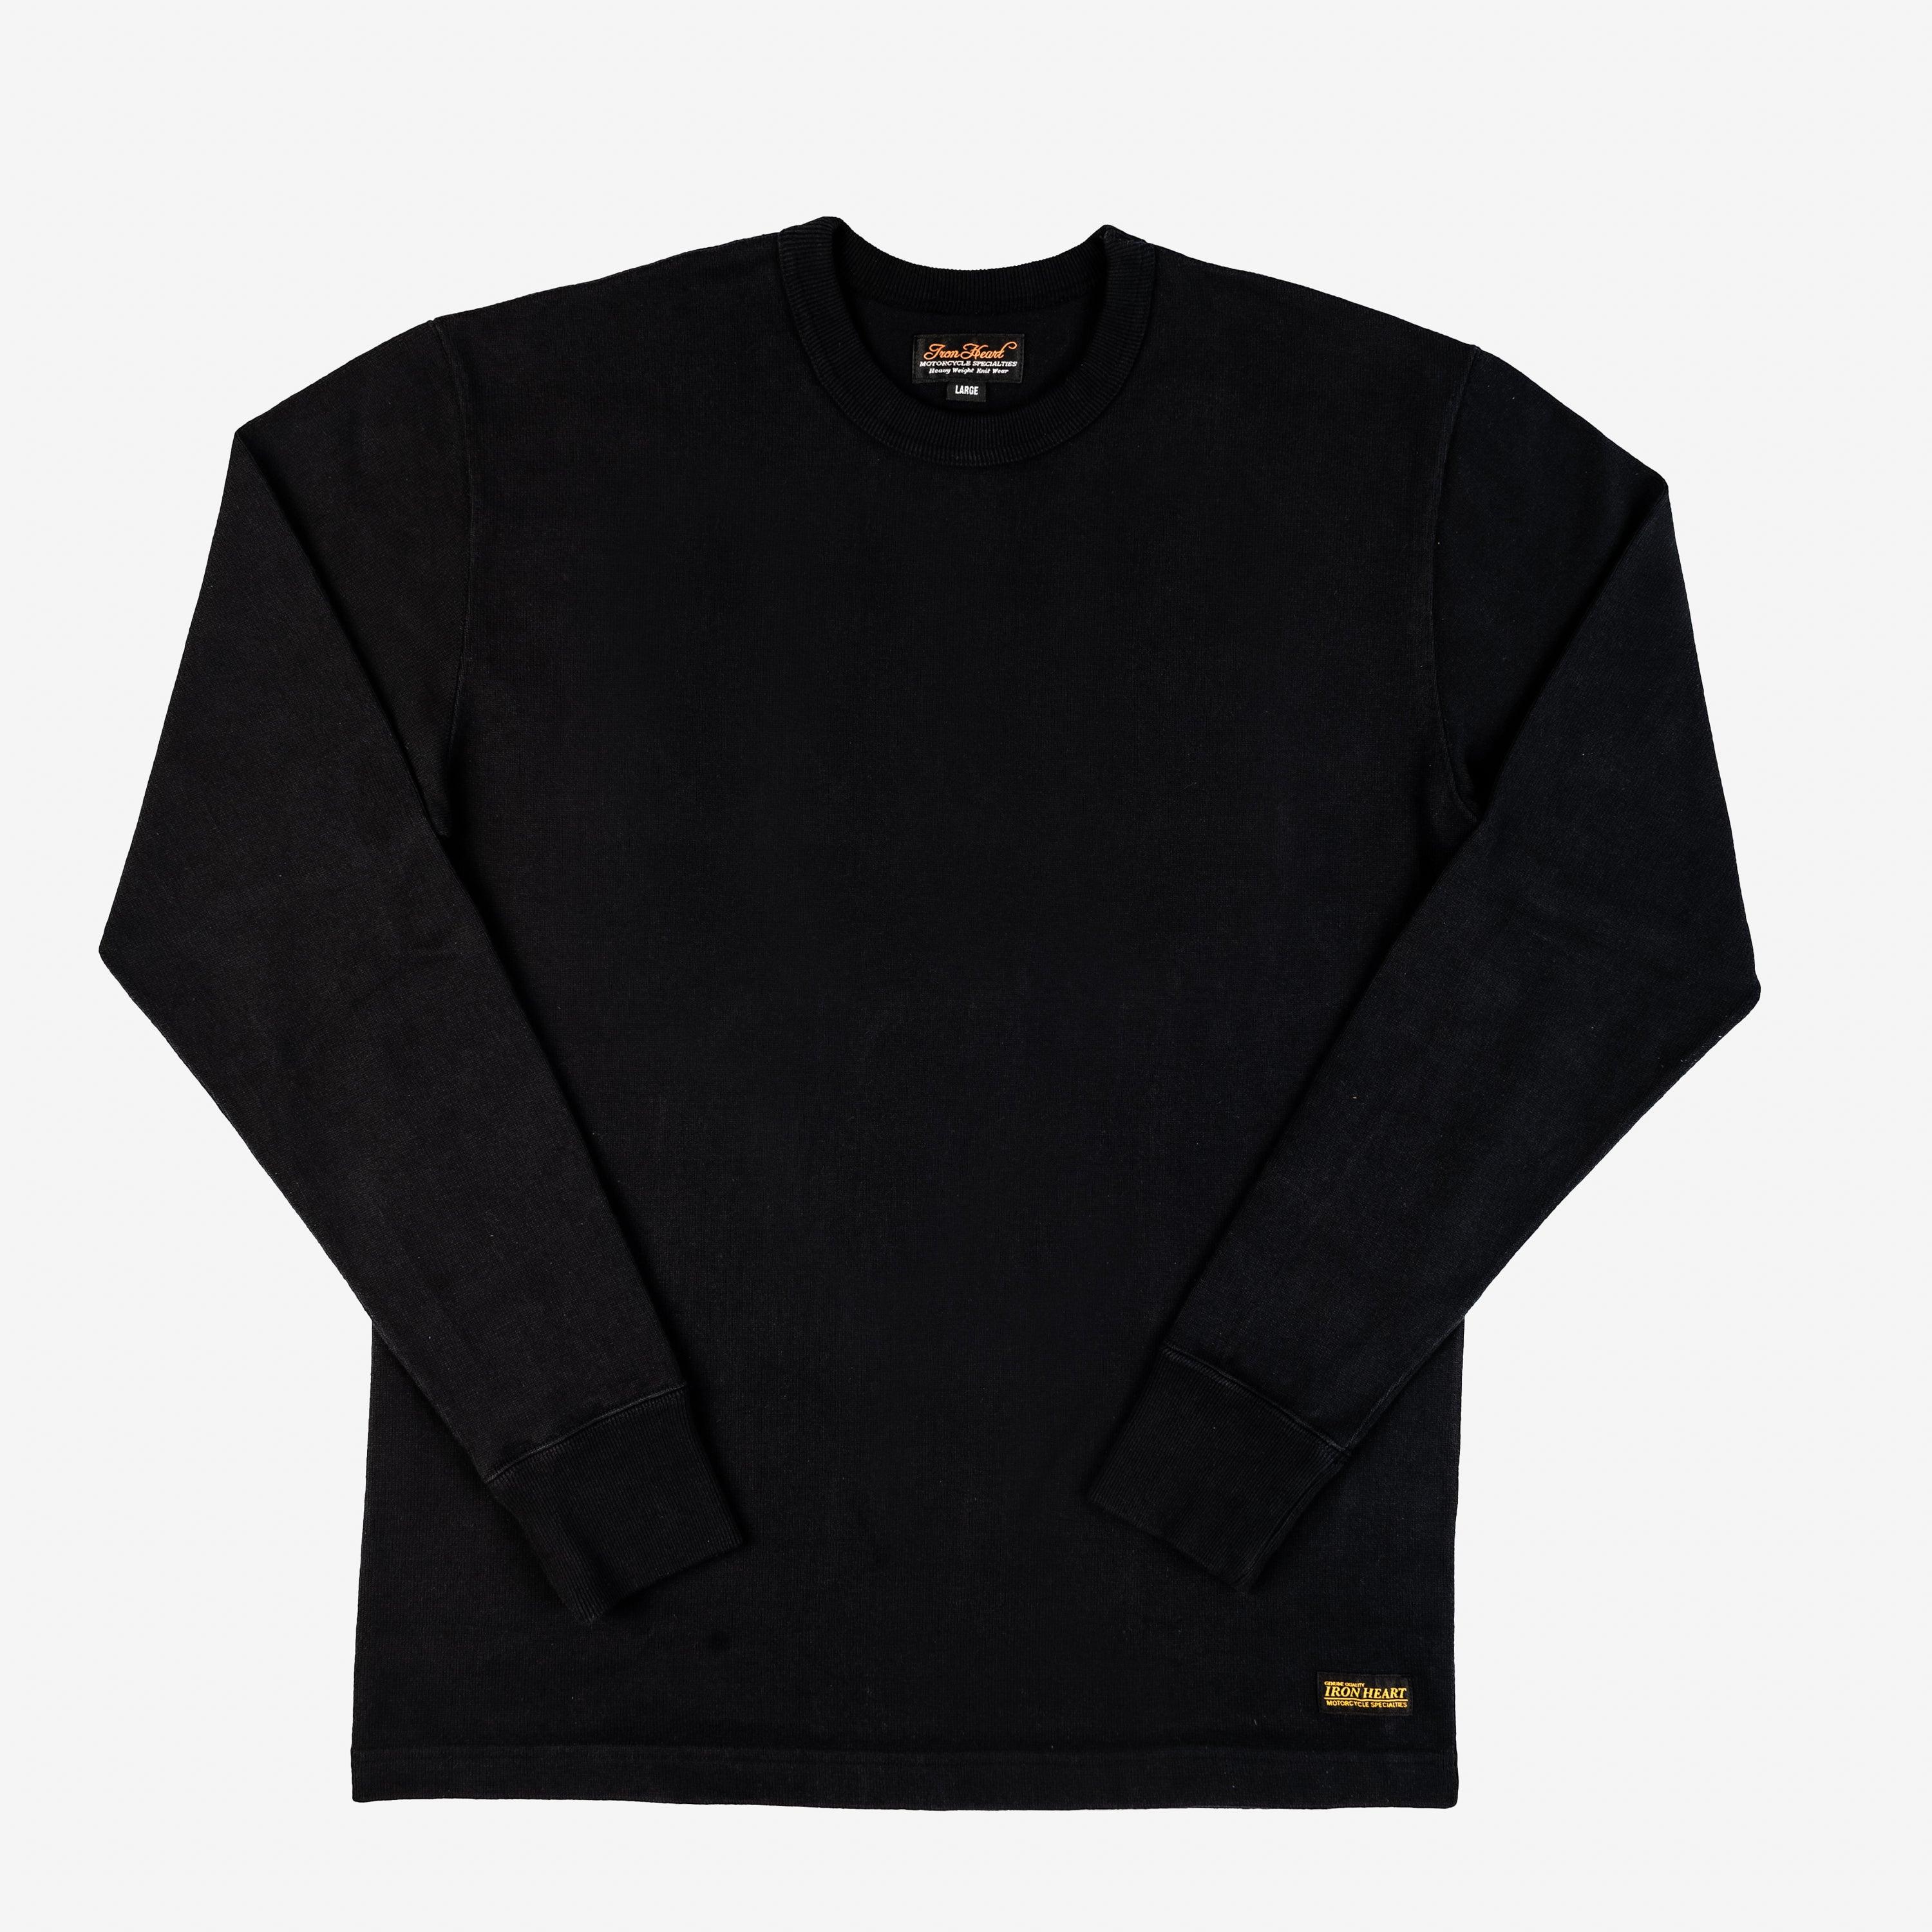 Iron Heart IHTL-1501-BLK 11oz Cotton Knit Long Sleeved Crew Neck Sweater - Black - Guilty Party